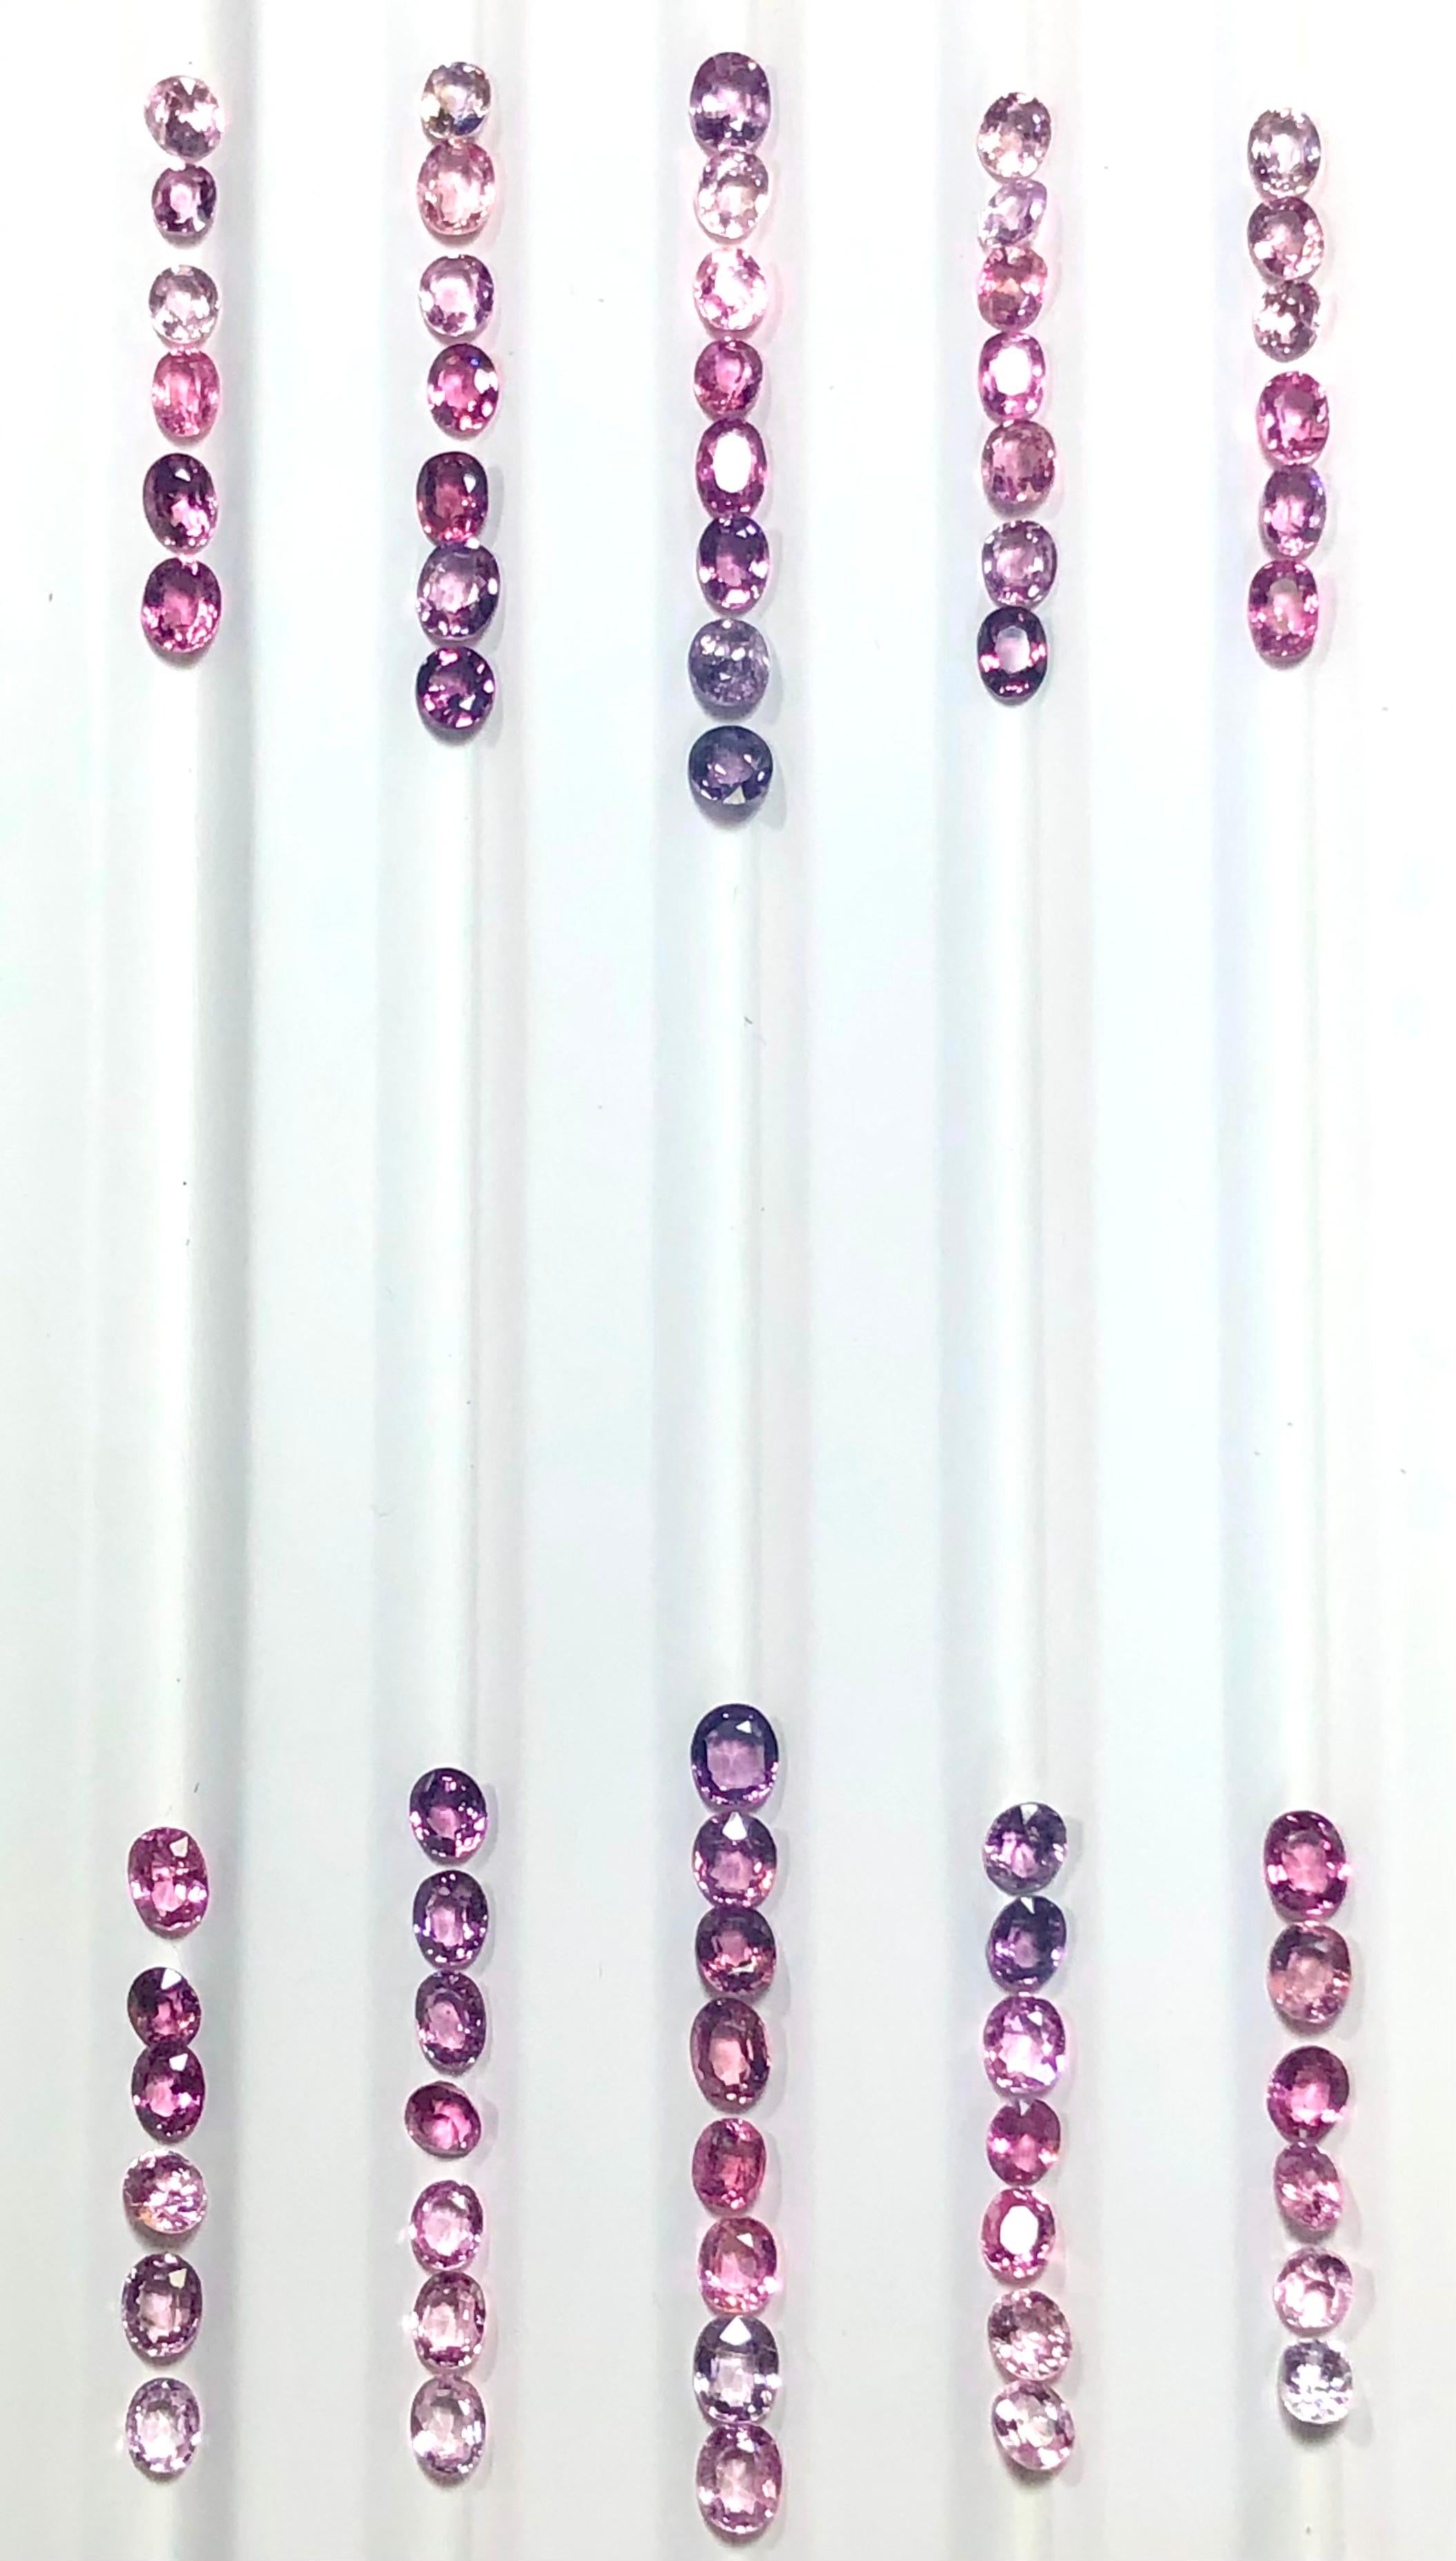 Spinel Fancy Oval Waterfall Loose Gems Set
Spinel fancy 100% natural oval loose gems set palette from baby pink to hot pink and violet to purple. Set weighing 54.50 carats, offered loose for sensational waterfall earrings! 
Dimension approx 6.00mm x